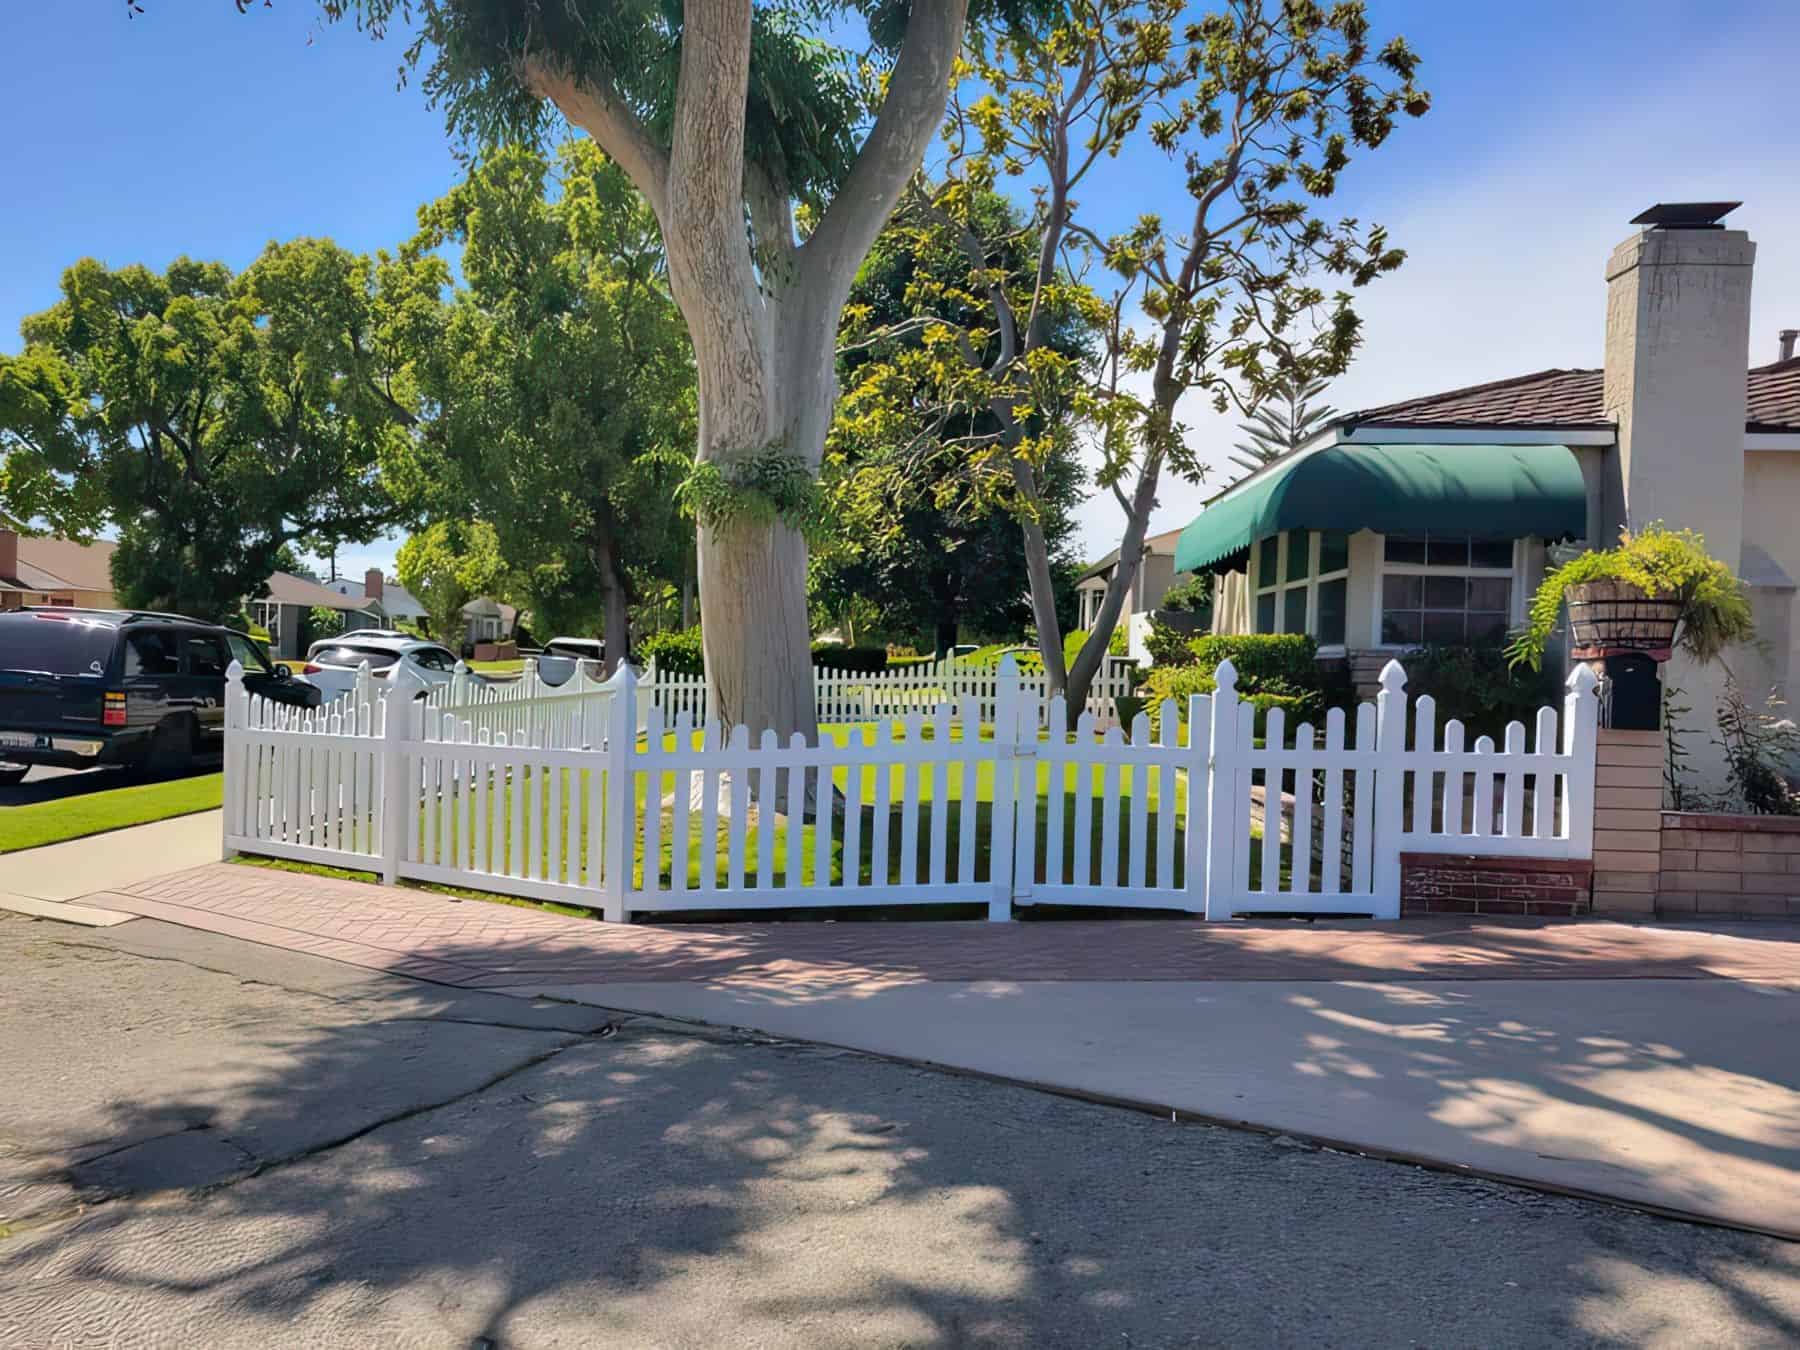 Vinyl picket fence surrounding ranch style suburban house in front of grassy lawn with rolling gate on concrete driveway